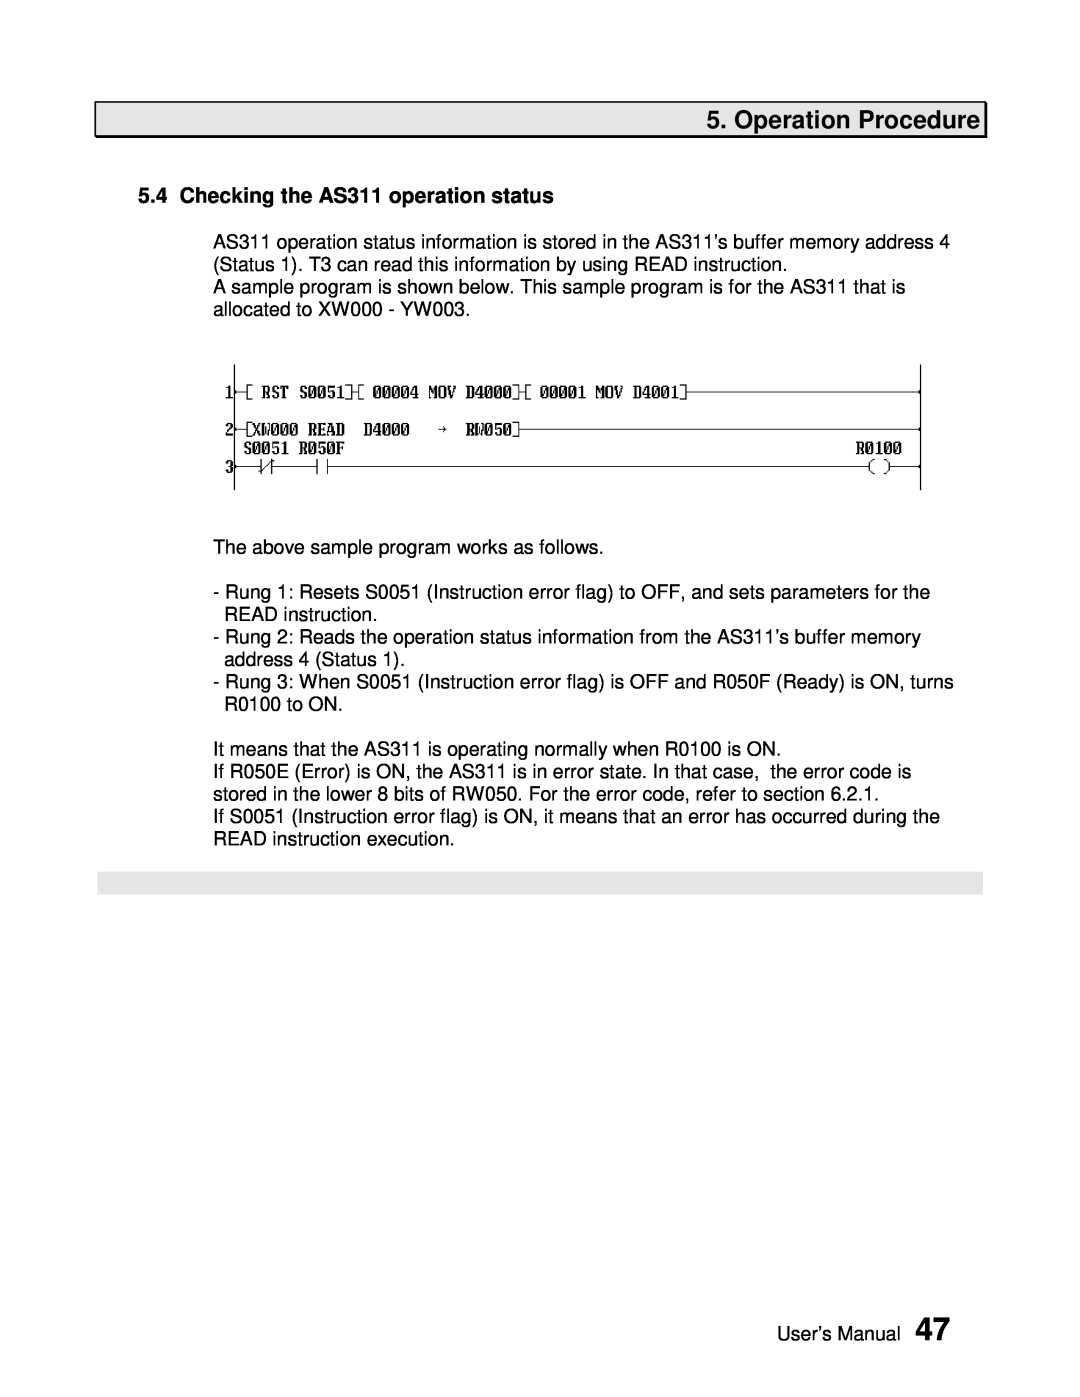 Toshiba user manual Checking the AS311 operation status, Operation Procedure 